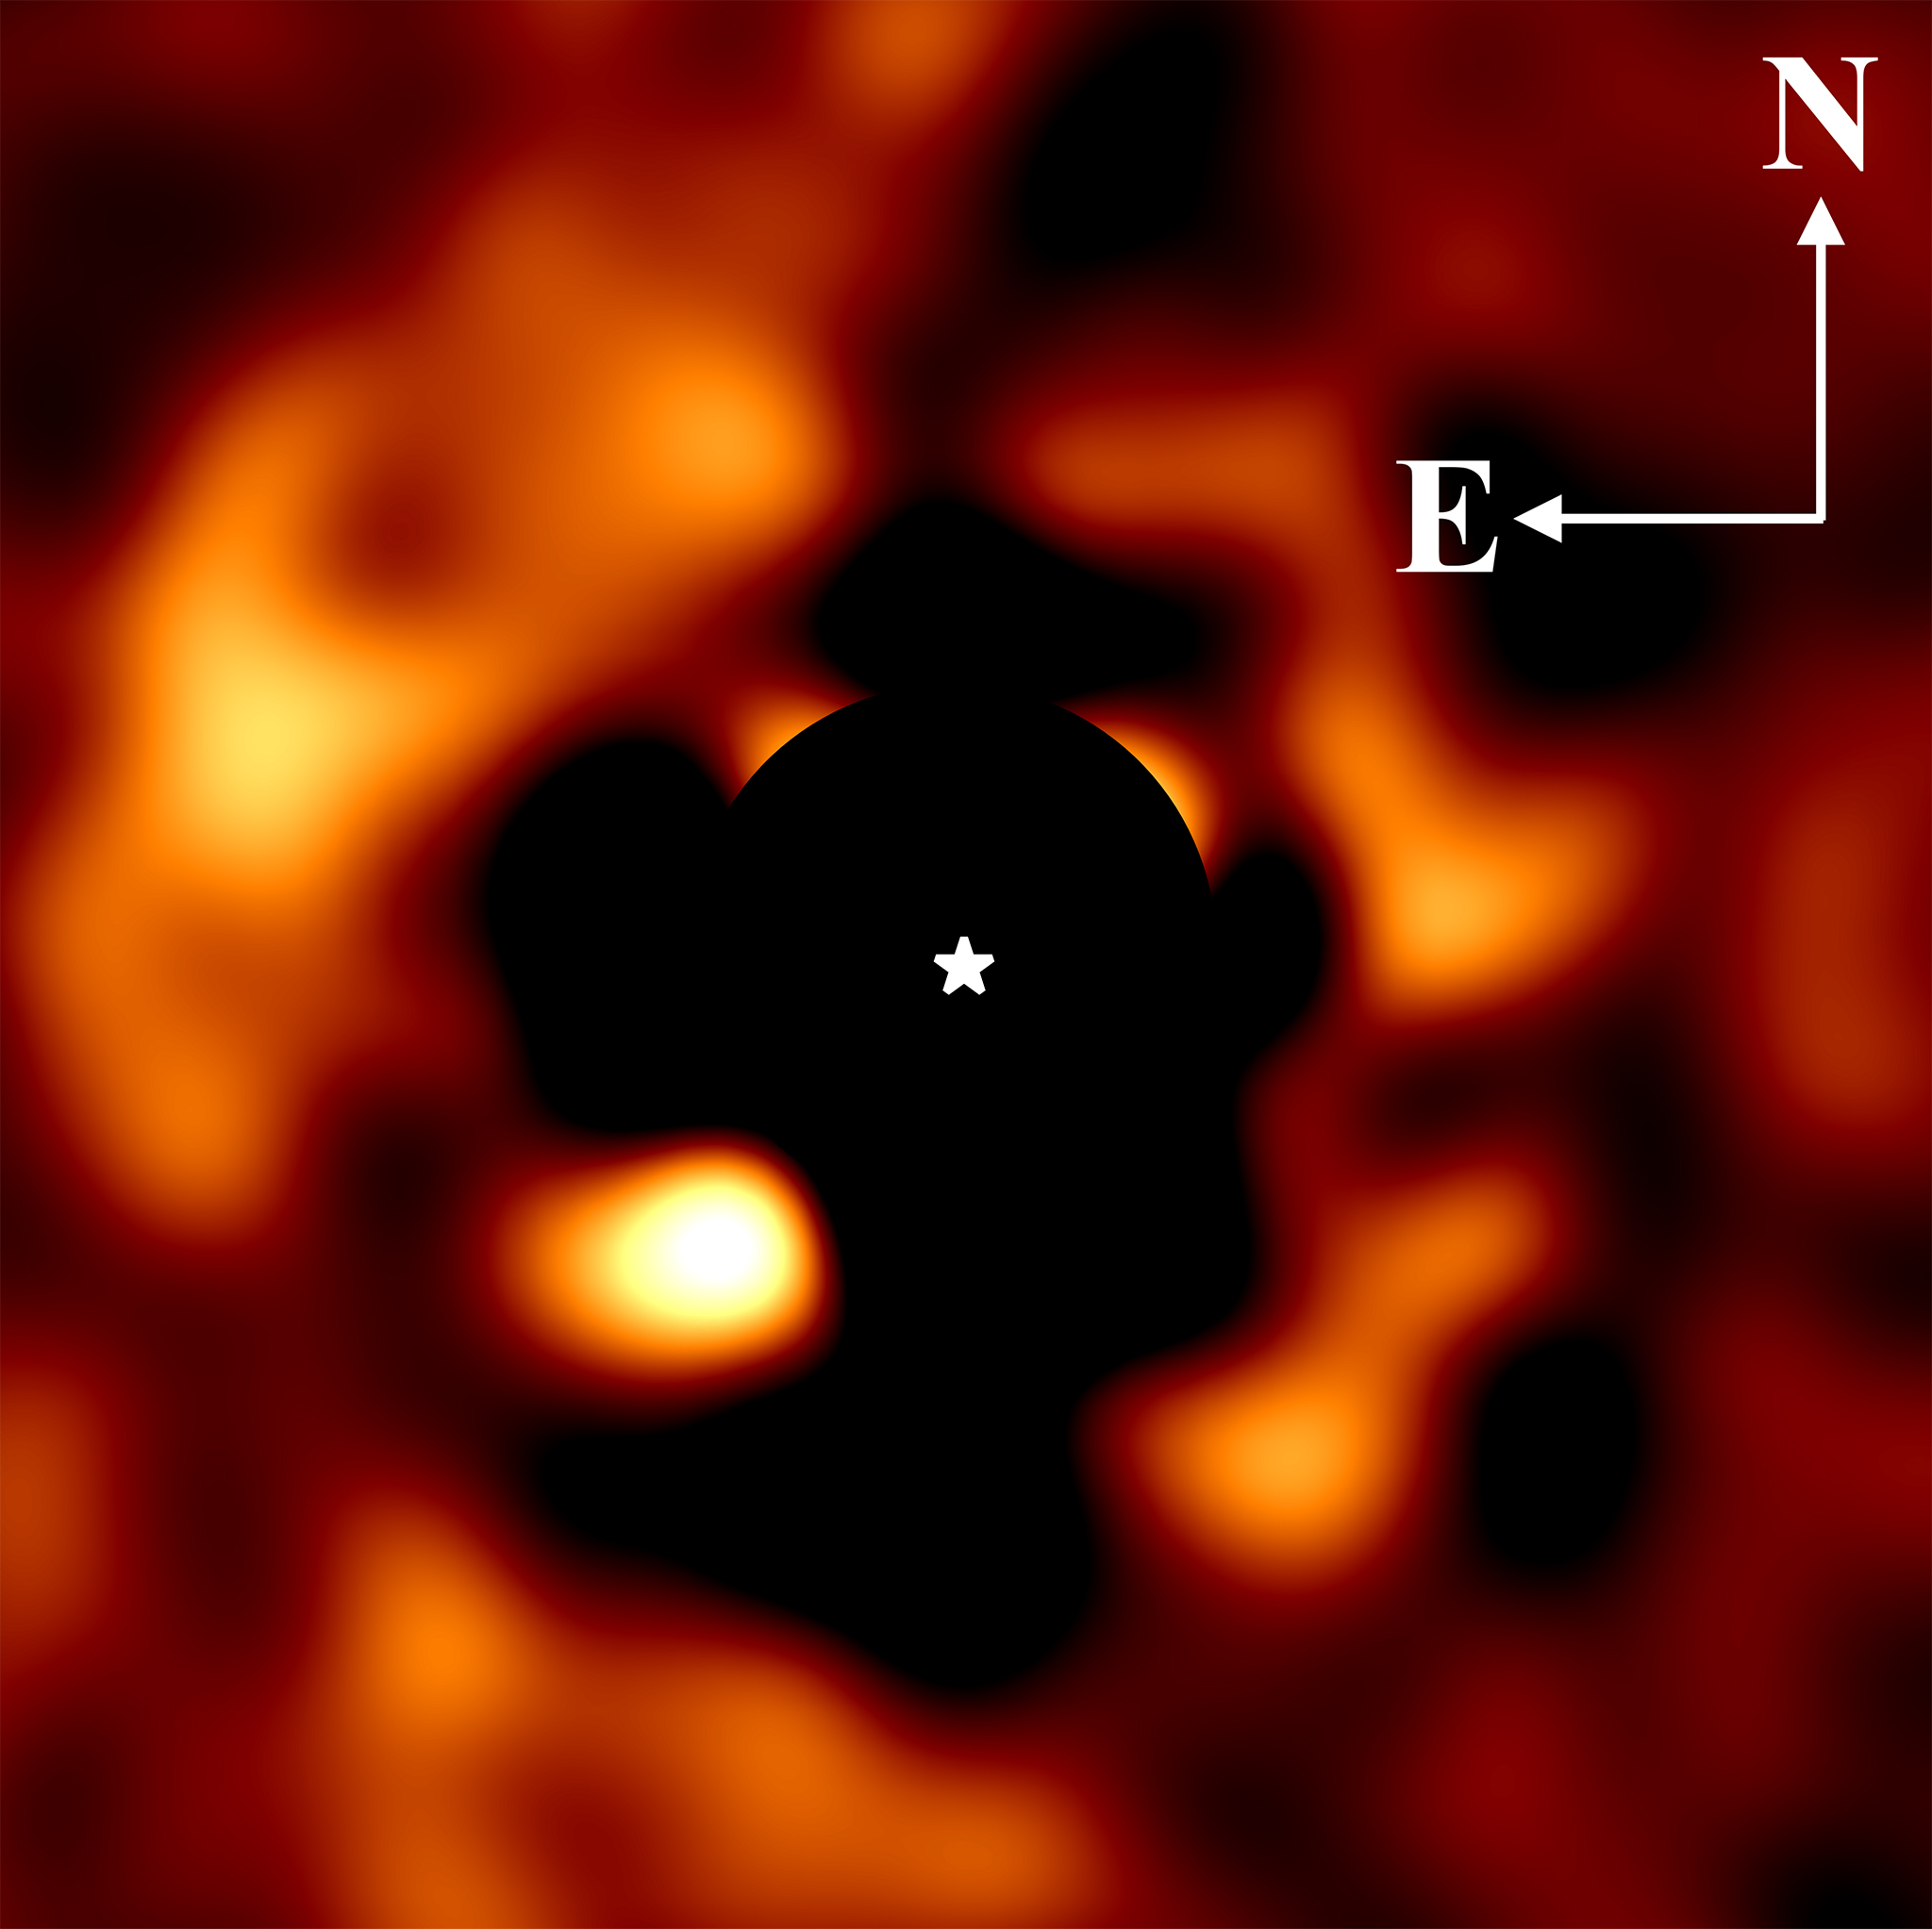 The first image captured by the Hubble Space Telescope of the newborn exoplanet PDS70b, orbiting a young star approximately 370 light years away from Earth. 